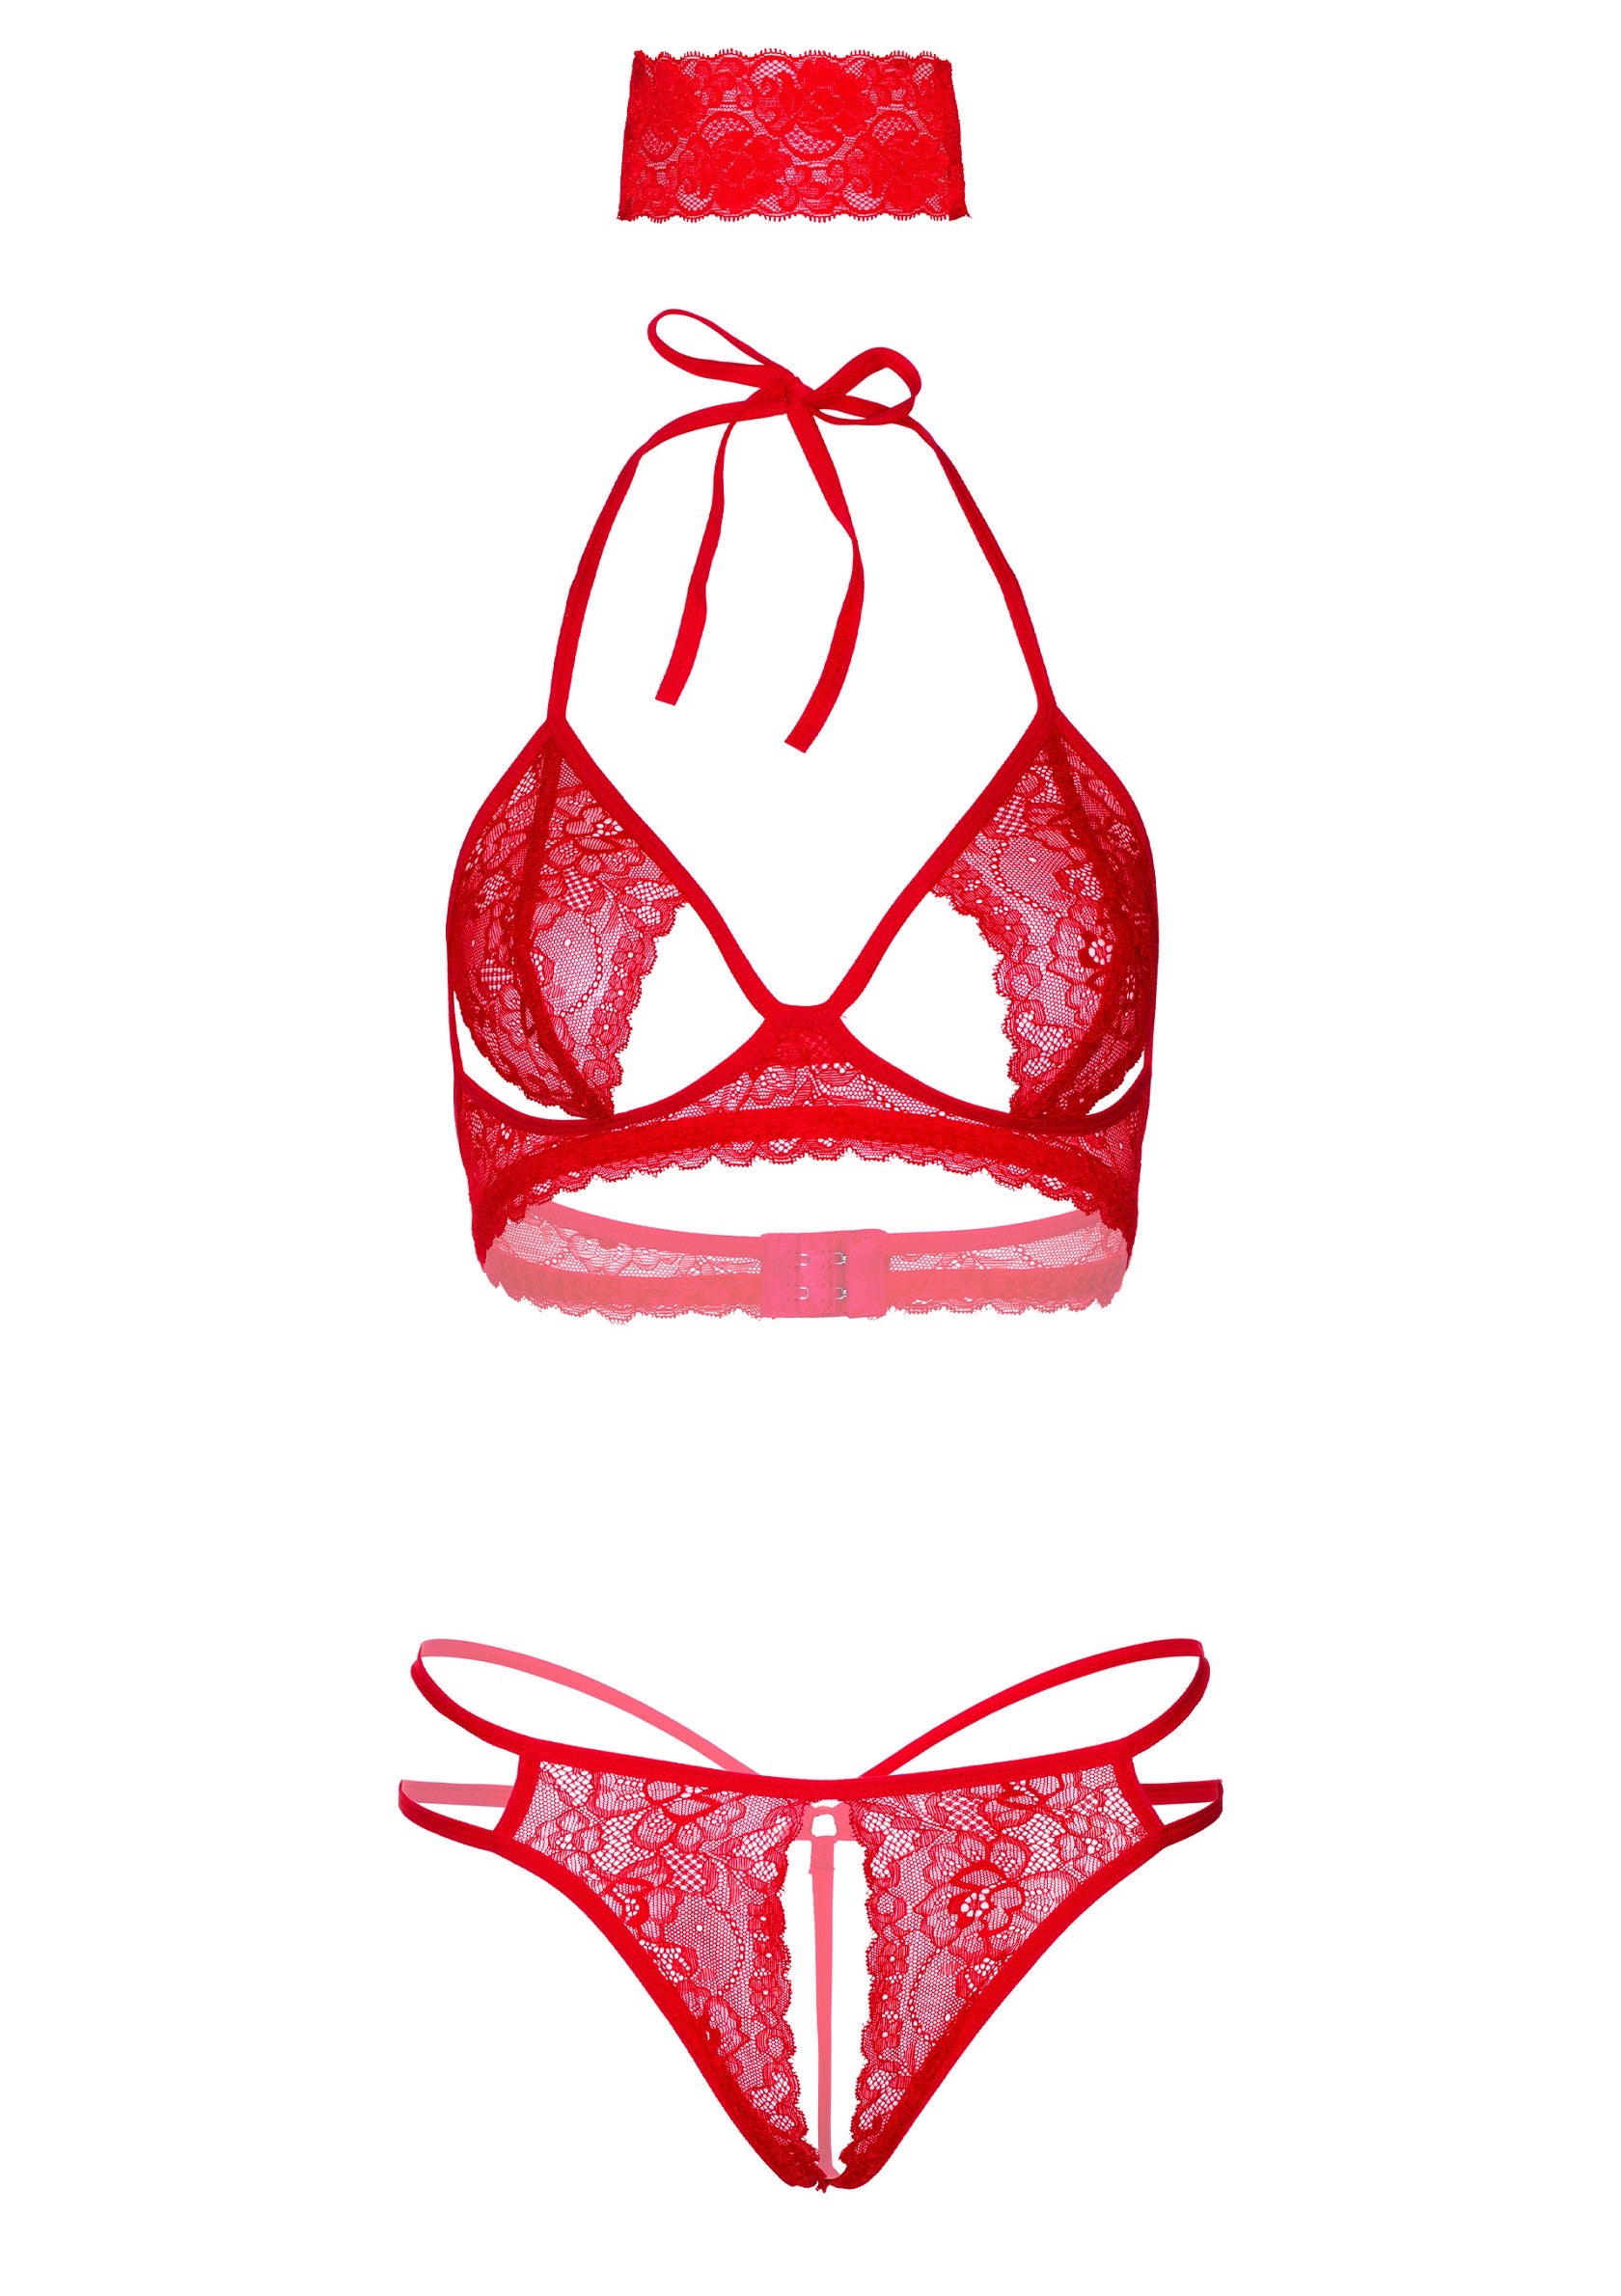 Daring Intimates 3PC Bra, Panty and Blindfold RED S/M - 7